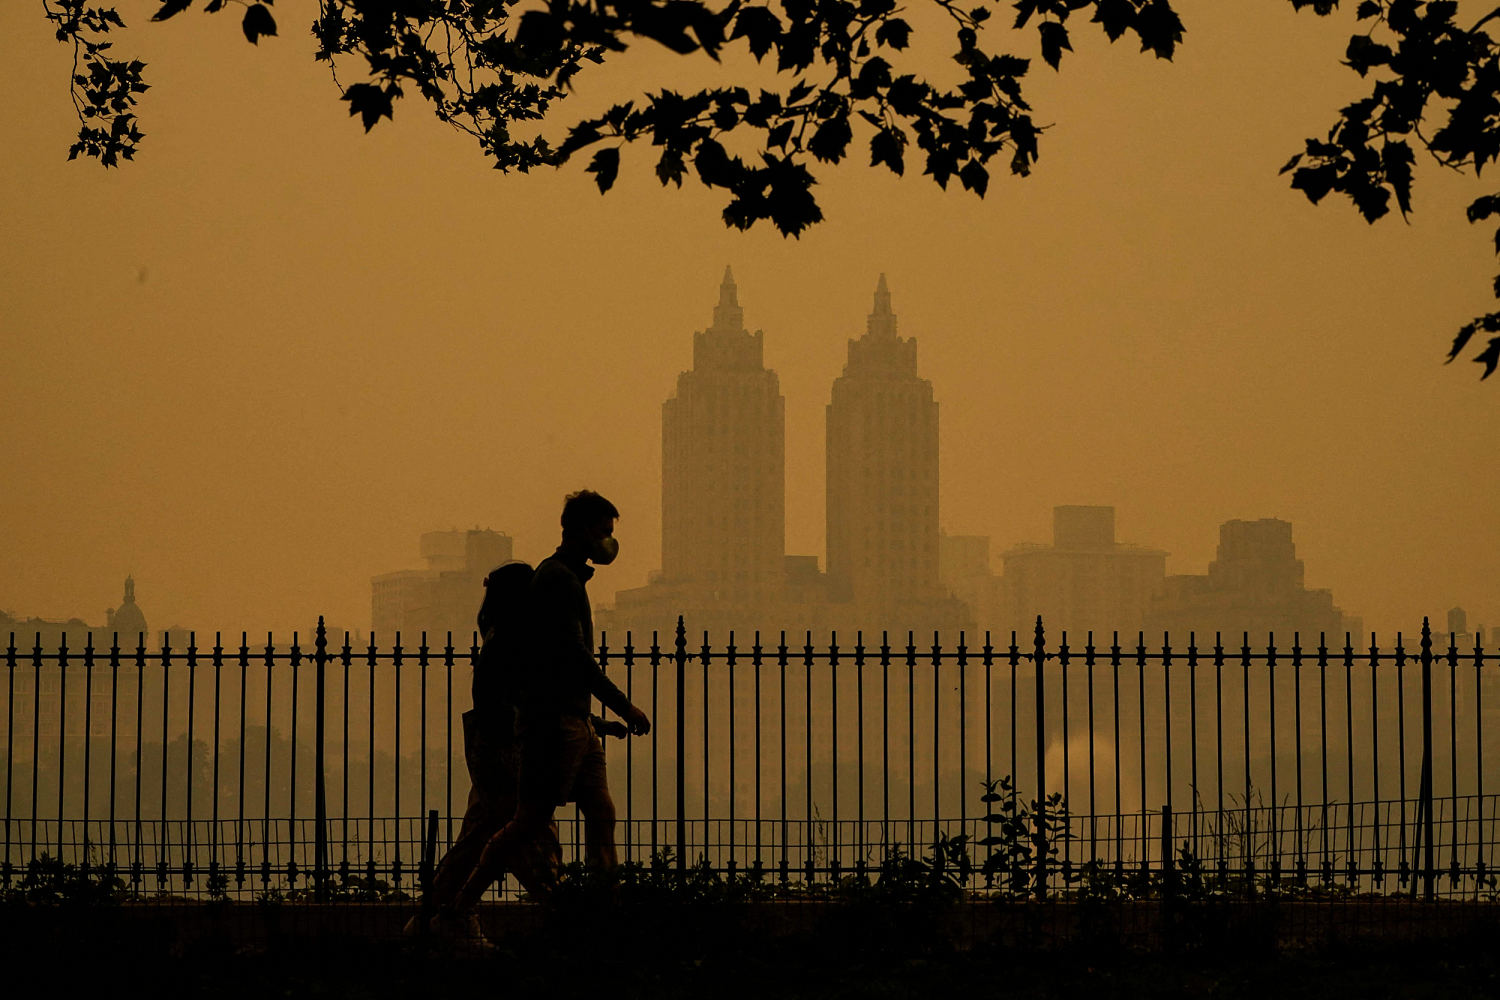 Even short-term exposure to air pollution may raise risk of stroke